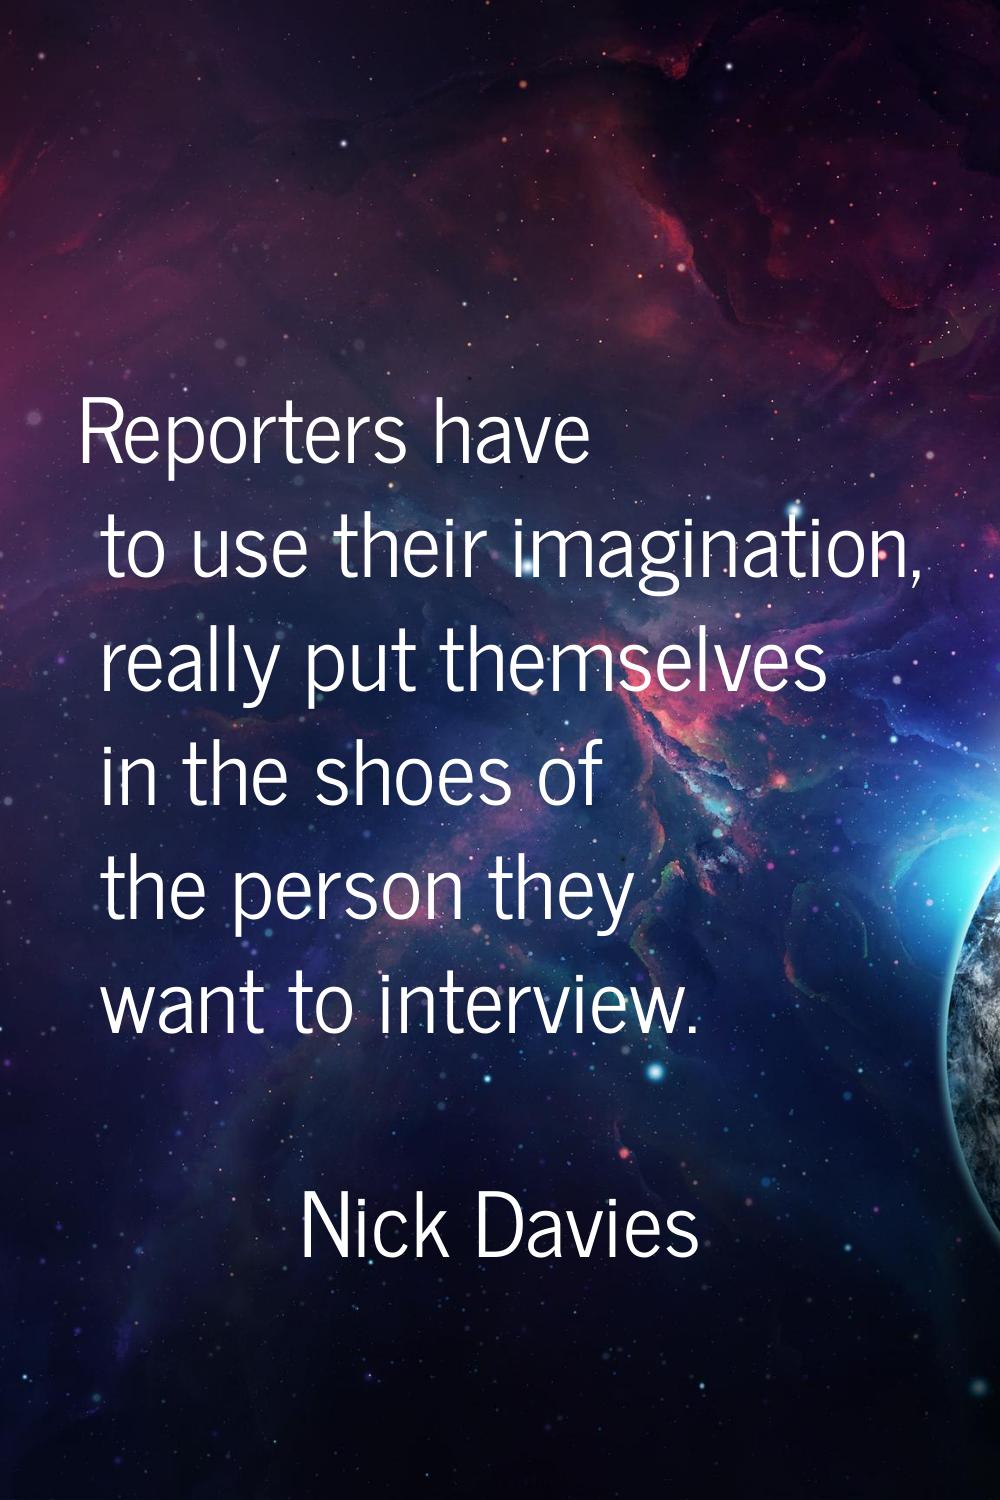 Reporters have to use their imagination, really put themselves in the shoes of the person they want